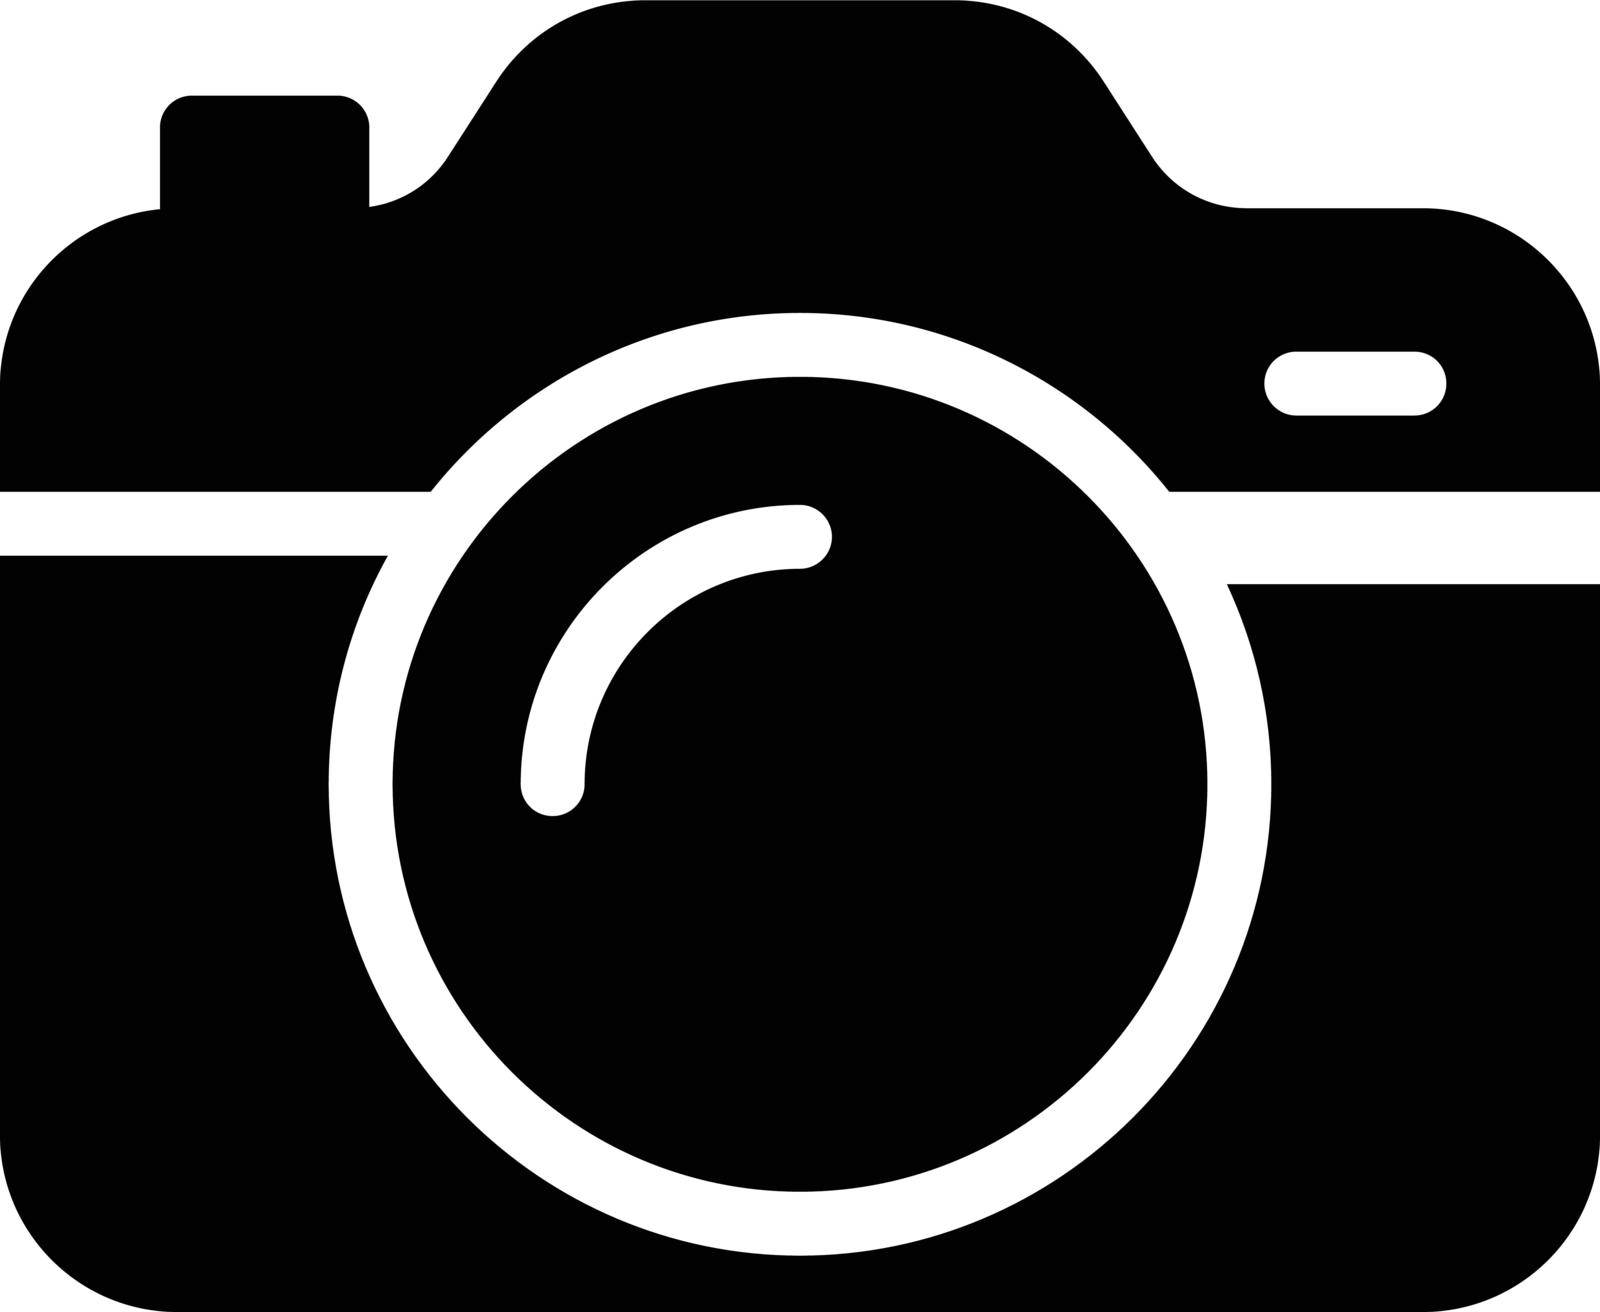 camera Vector illustration on a transparent background. Premium quality symbols. Gyliph vector icon for concept and graphic design.